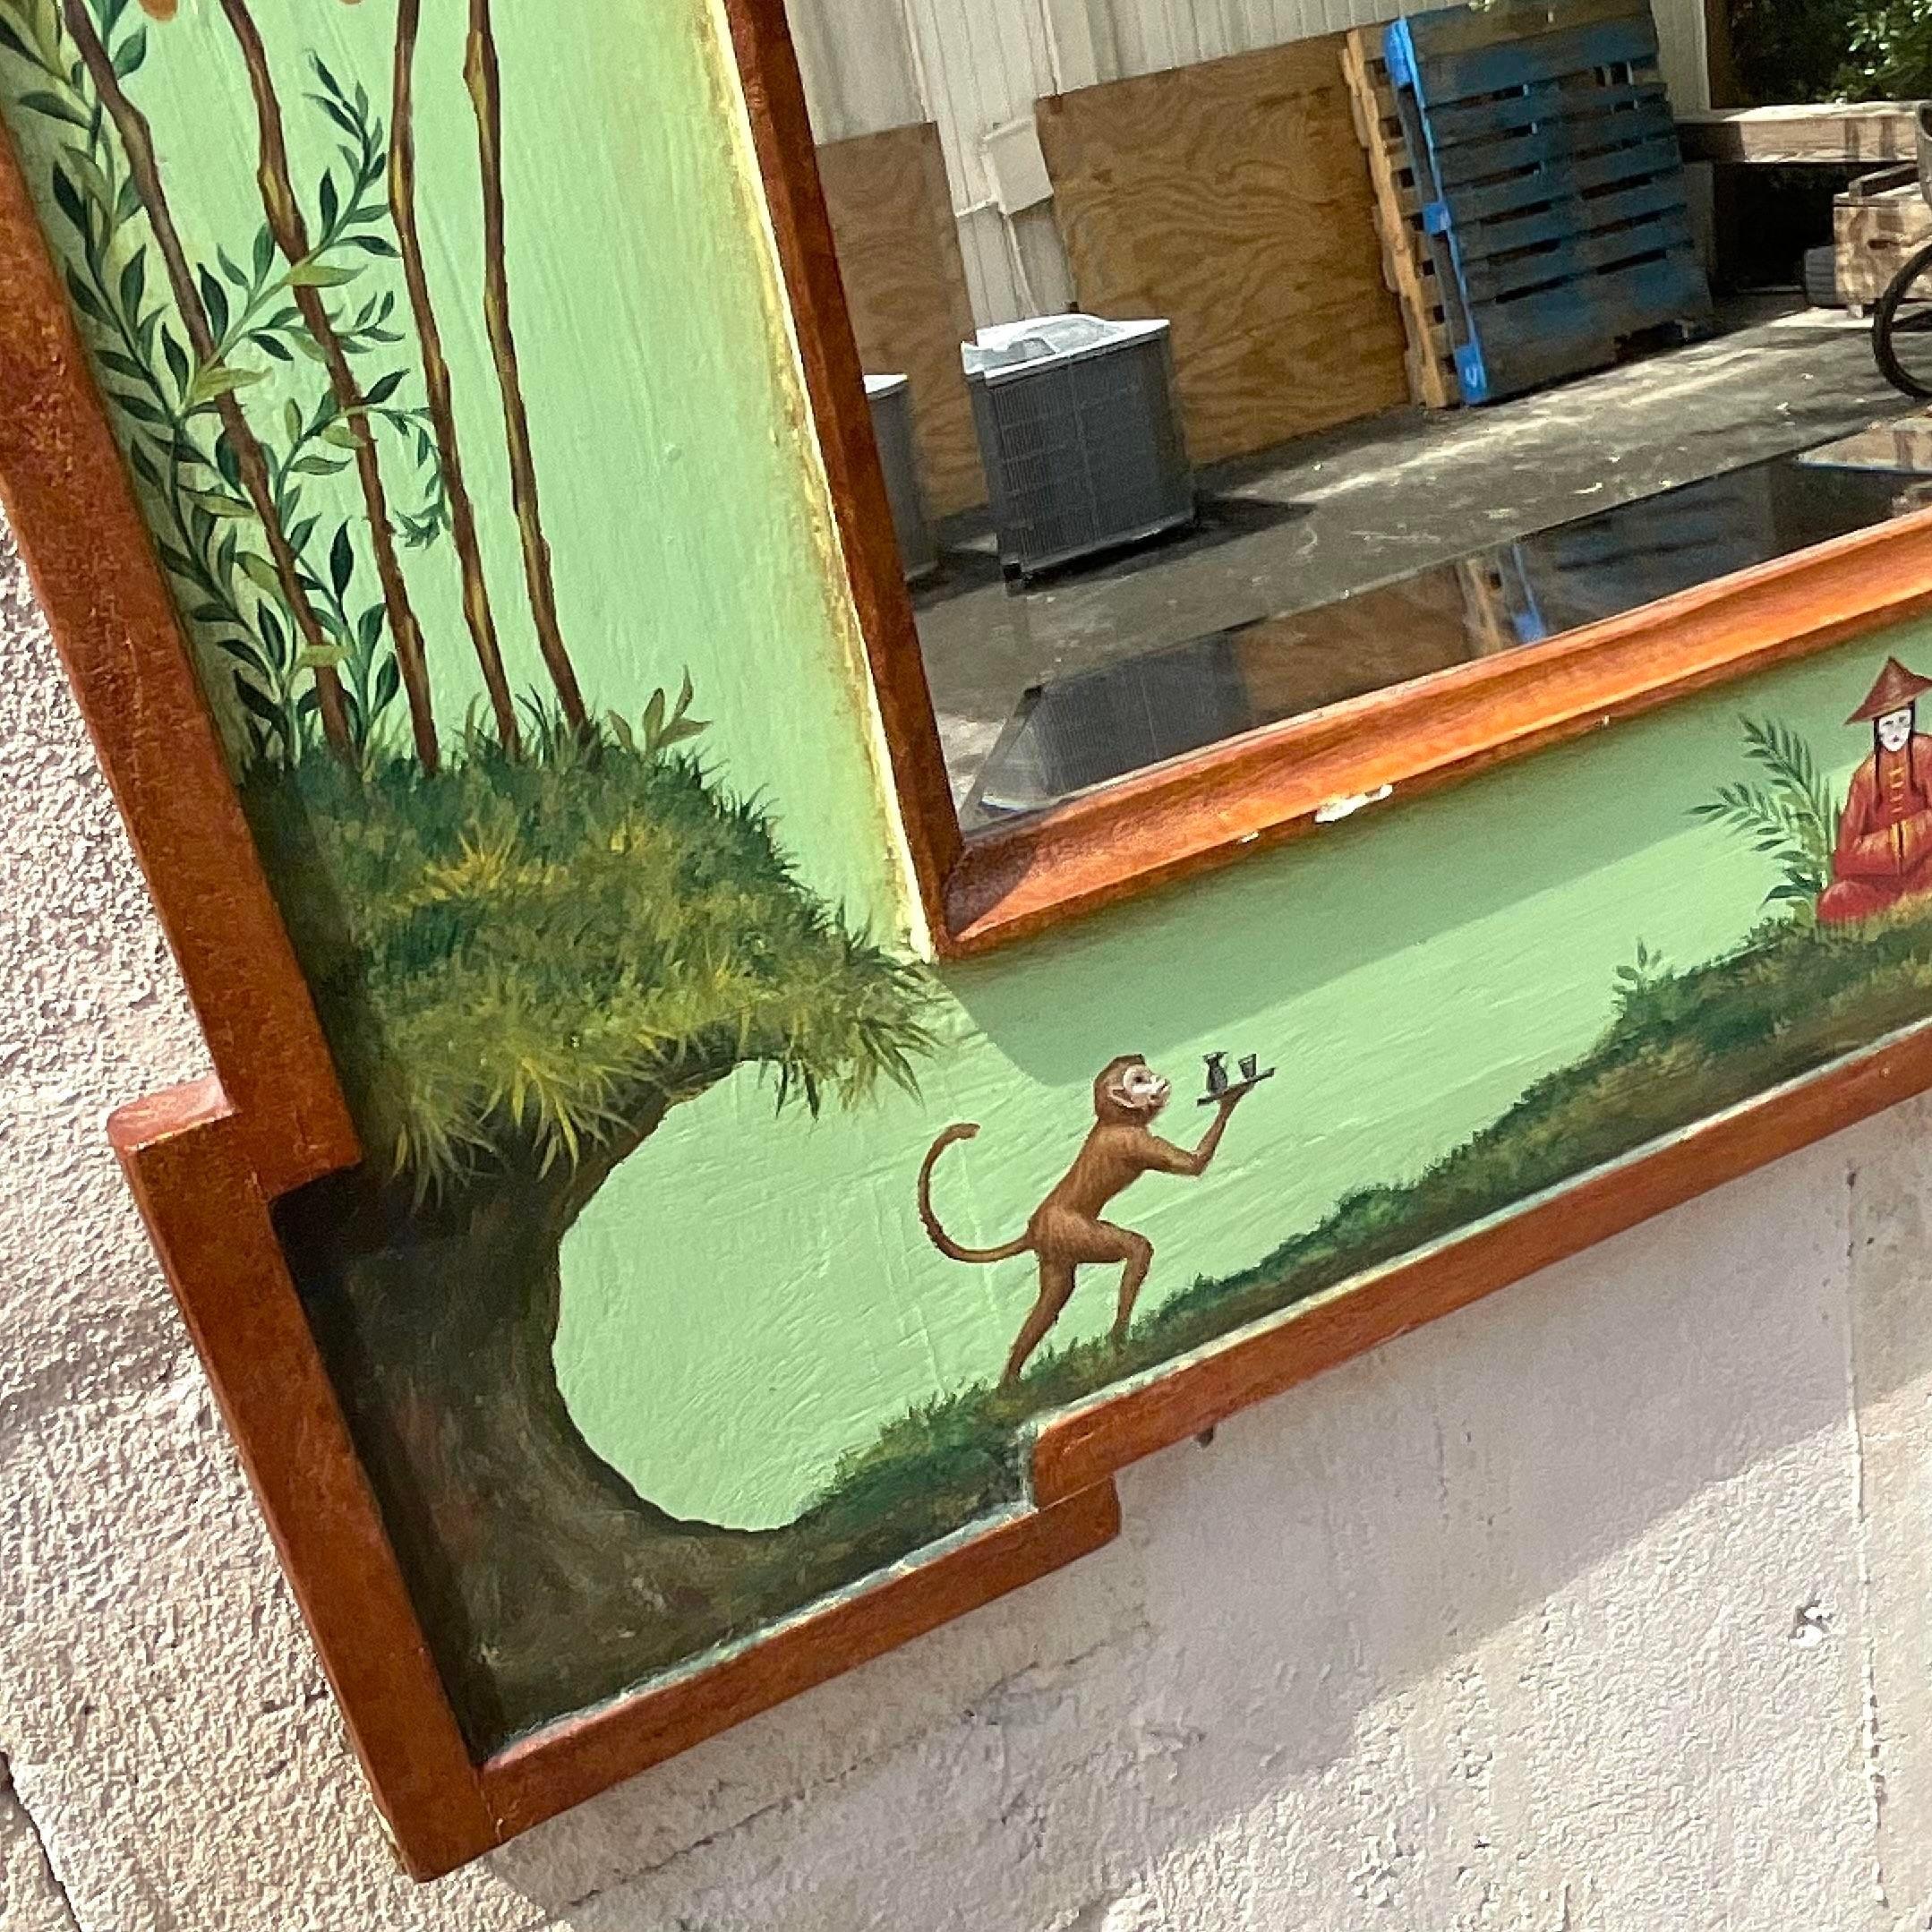 Step right up to this Vintage Regency hand-painted circus mirror. Combining American Regency elegance with whimsical circus flair, this mirror is a true conversation piece. Its hand-painted details add a playful touch, making it a standout addition